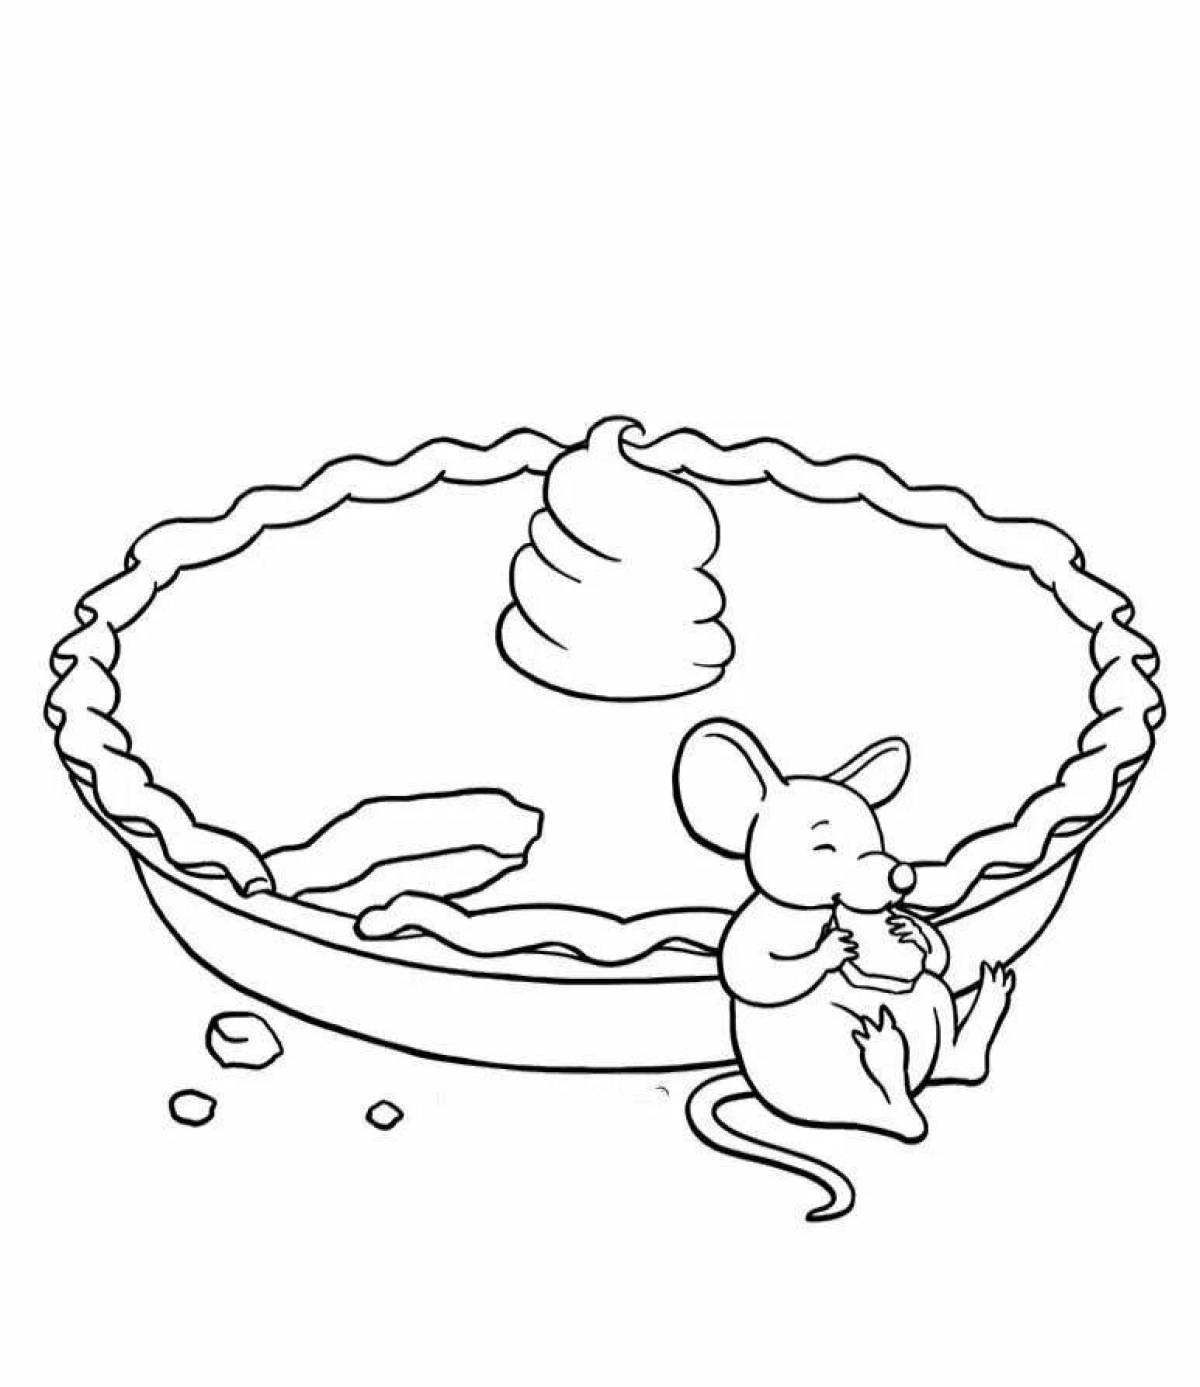 Colouring irresistible pie